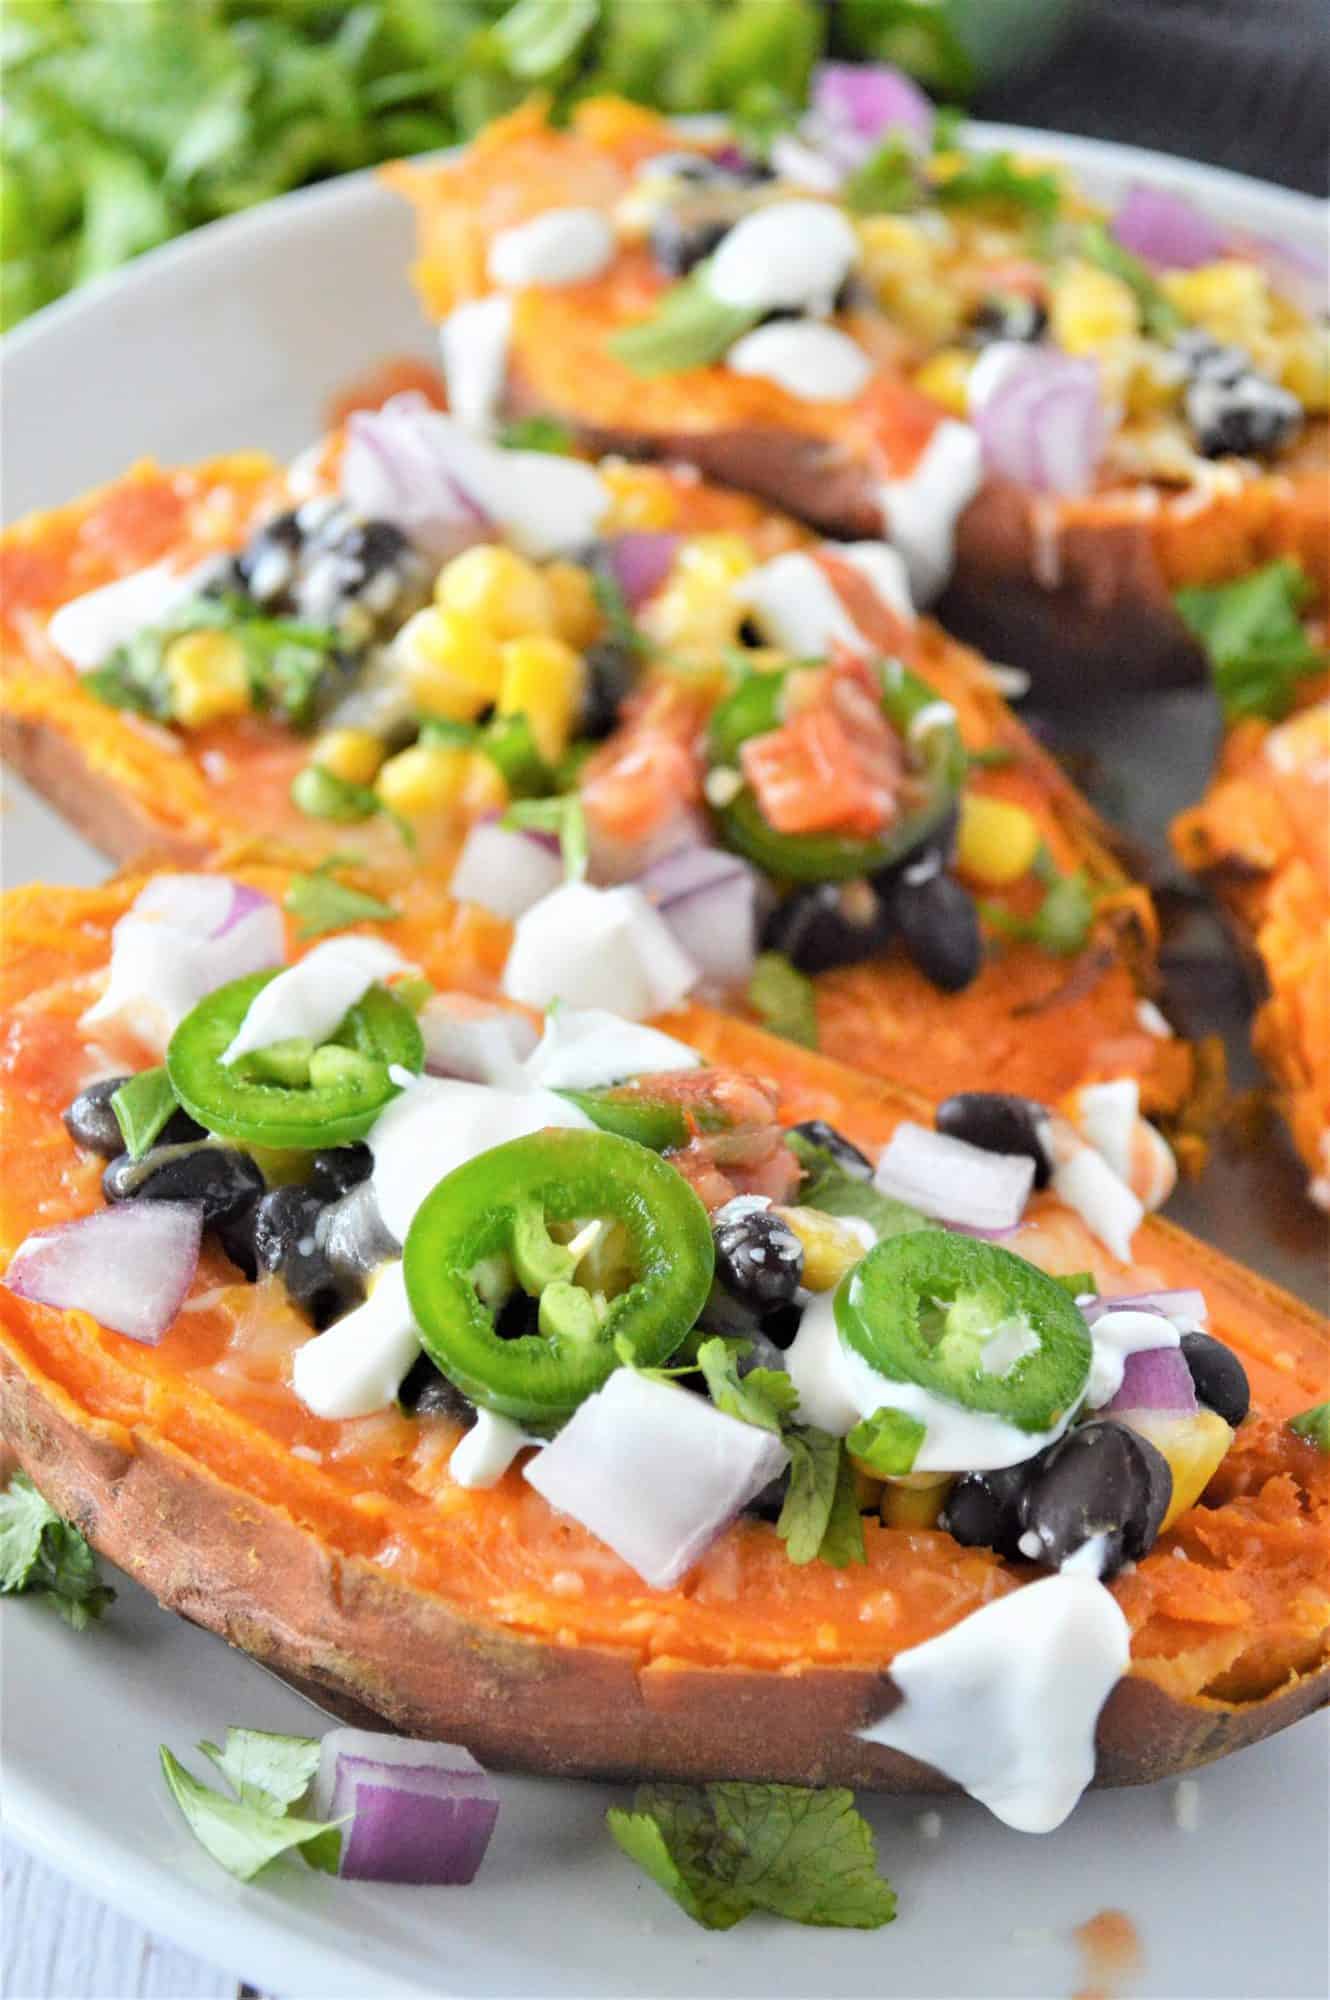 3 sweet potatoes on a plate stuffed with toppings